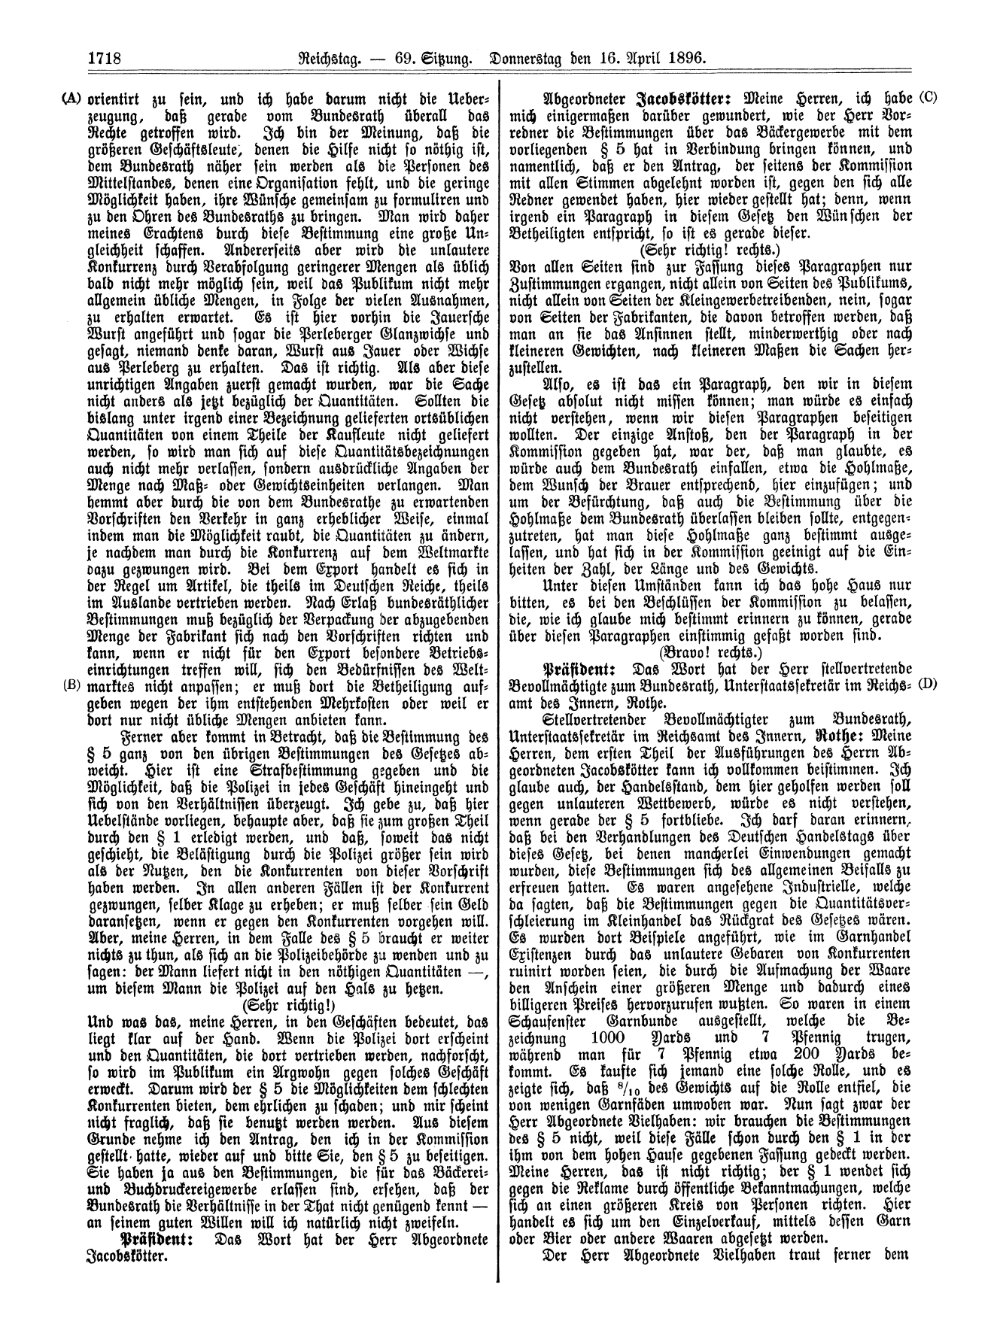 Scan of page 1718